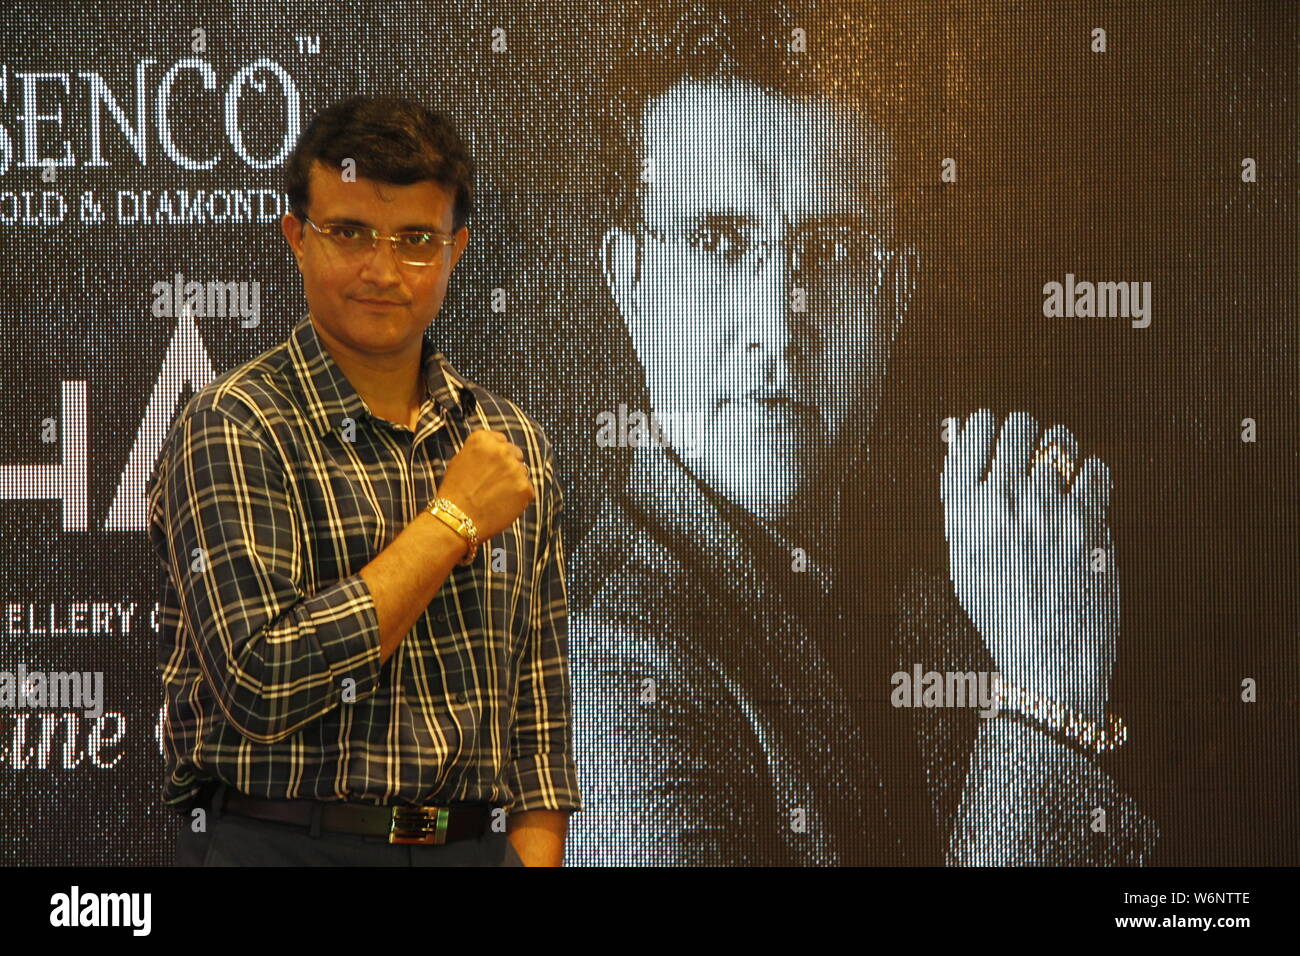 Sourav Ganguly, Indian cricket commentator and former cricketer inaugurates a range of men’s jewelry collections in a jewelry shop at Moulali in Kolkata. (Photo by Satyajit Shaw / Pacific Press) Stock Photo